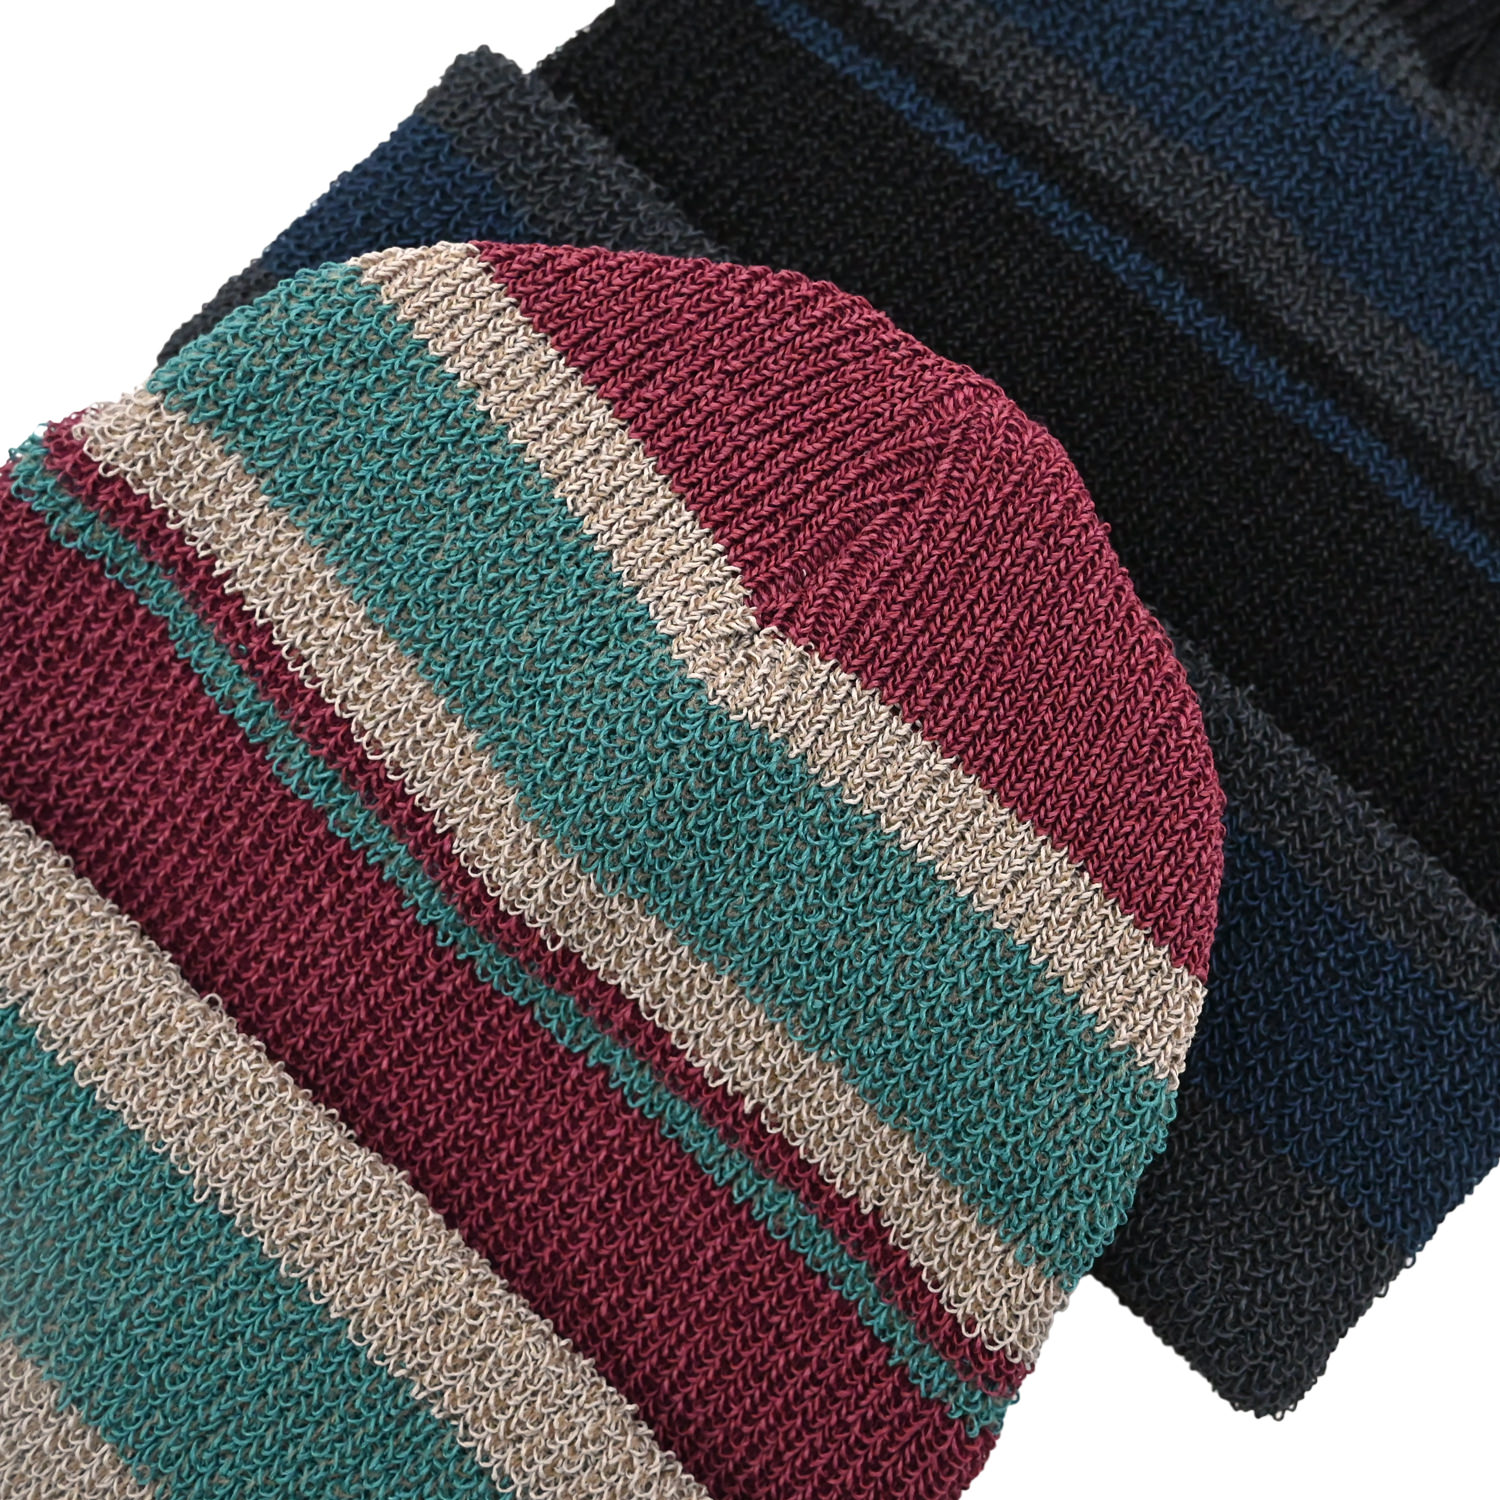 NOROLL (CONFECTION WASHI BEANIE) 通販 ｜ SUPPLY TOKYO online store